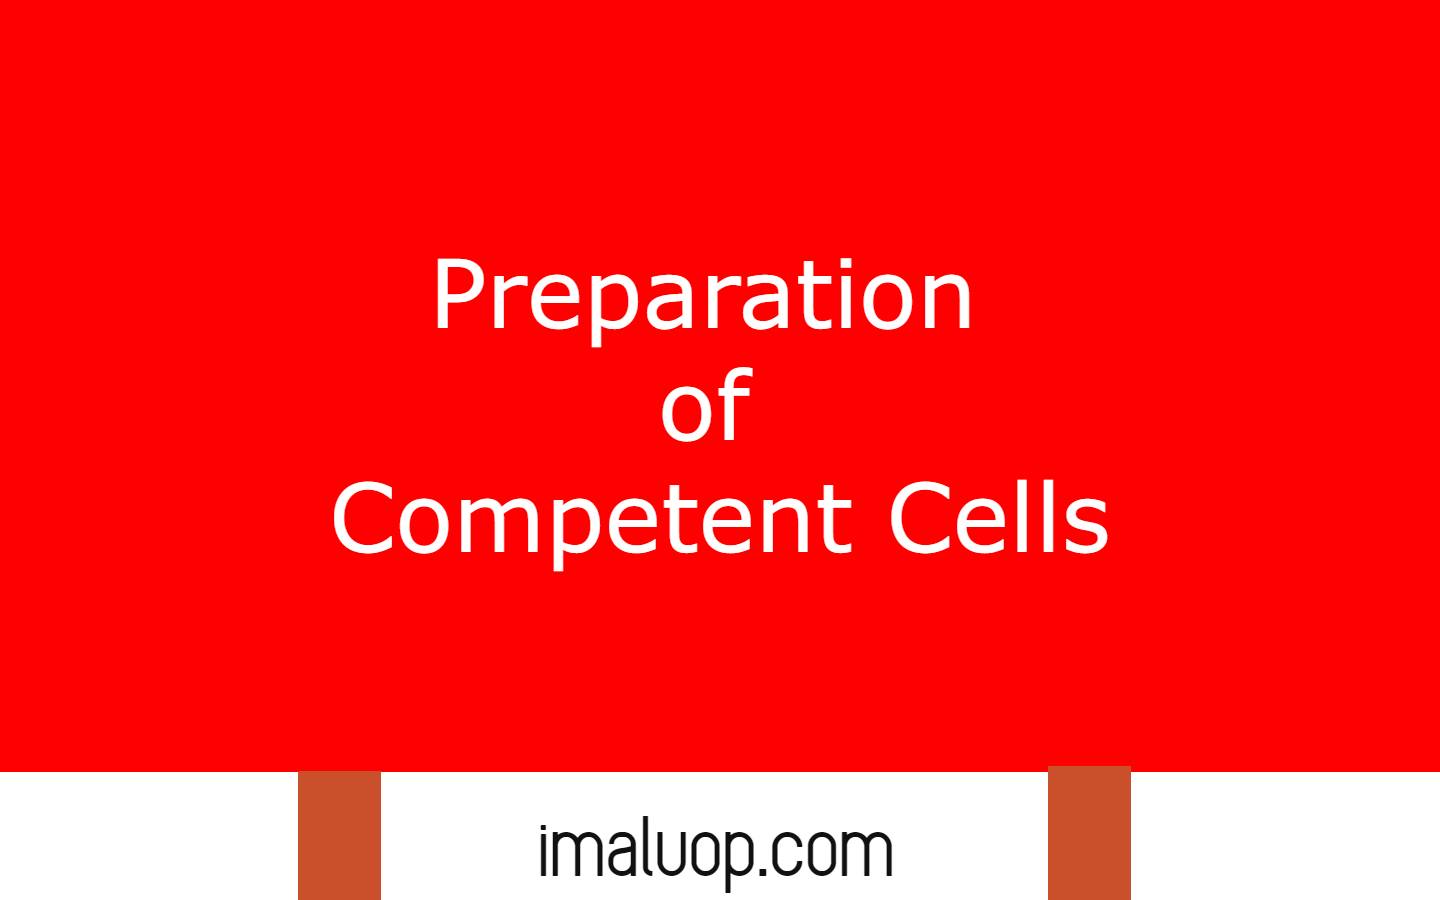 Preparation of Competent Cells